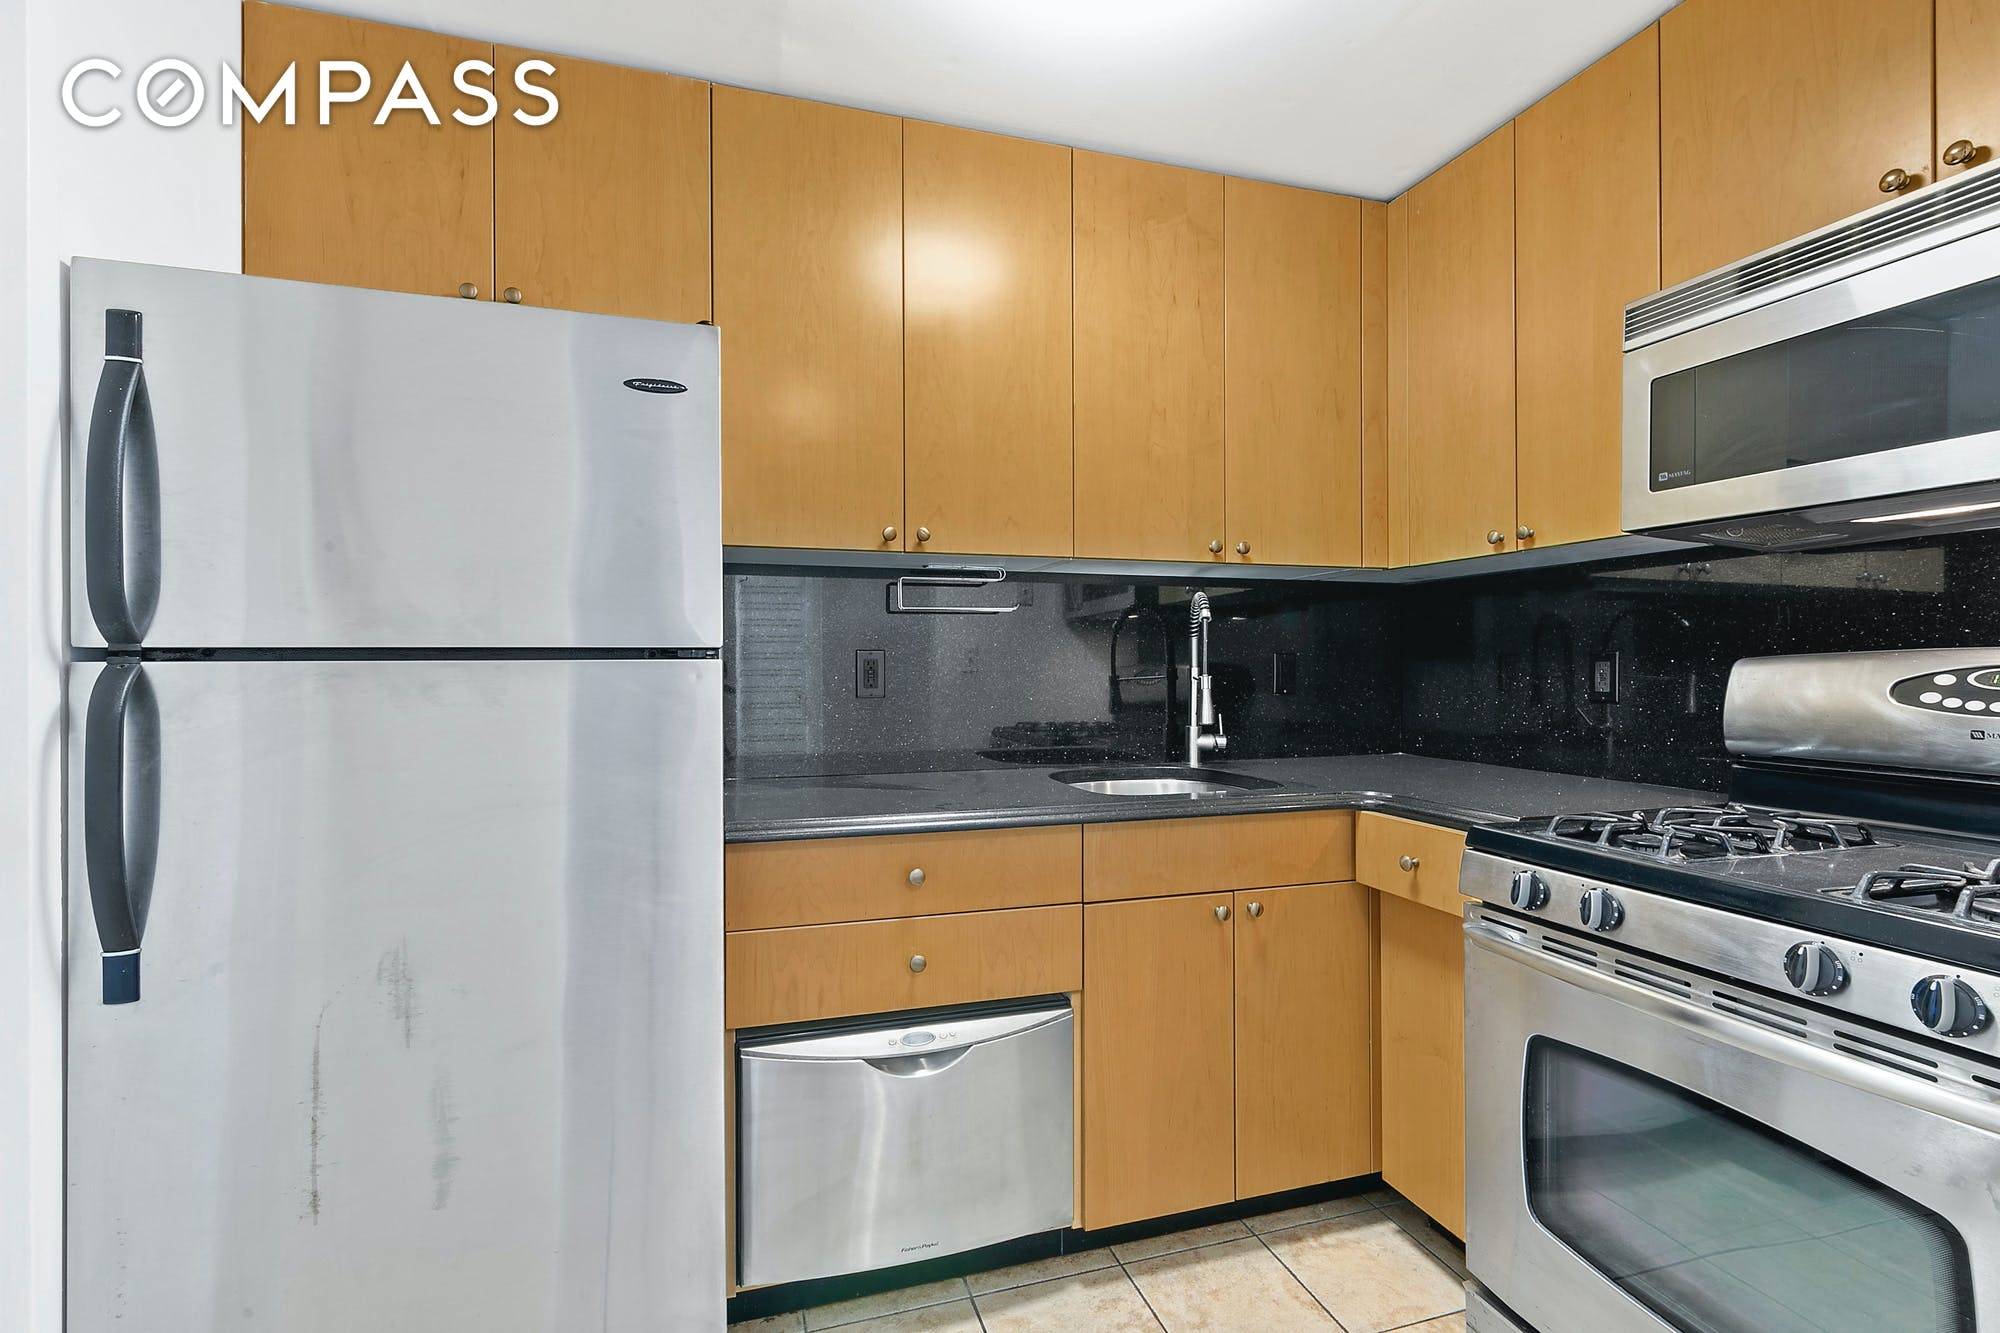 Great 2BR, 1. 5BA condo apartment located in Greenwood Heights, delivered with tax abatement and private balcony.